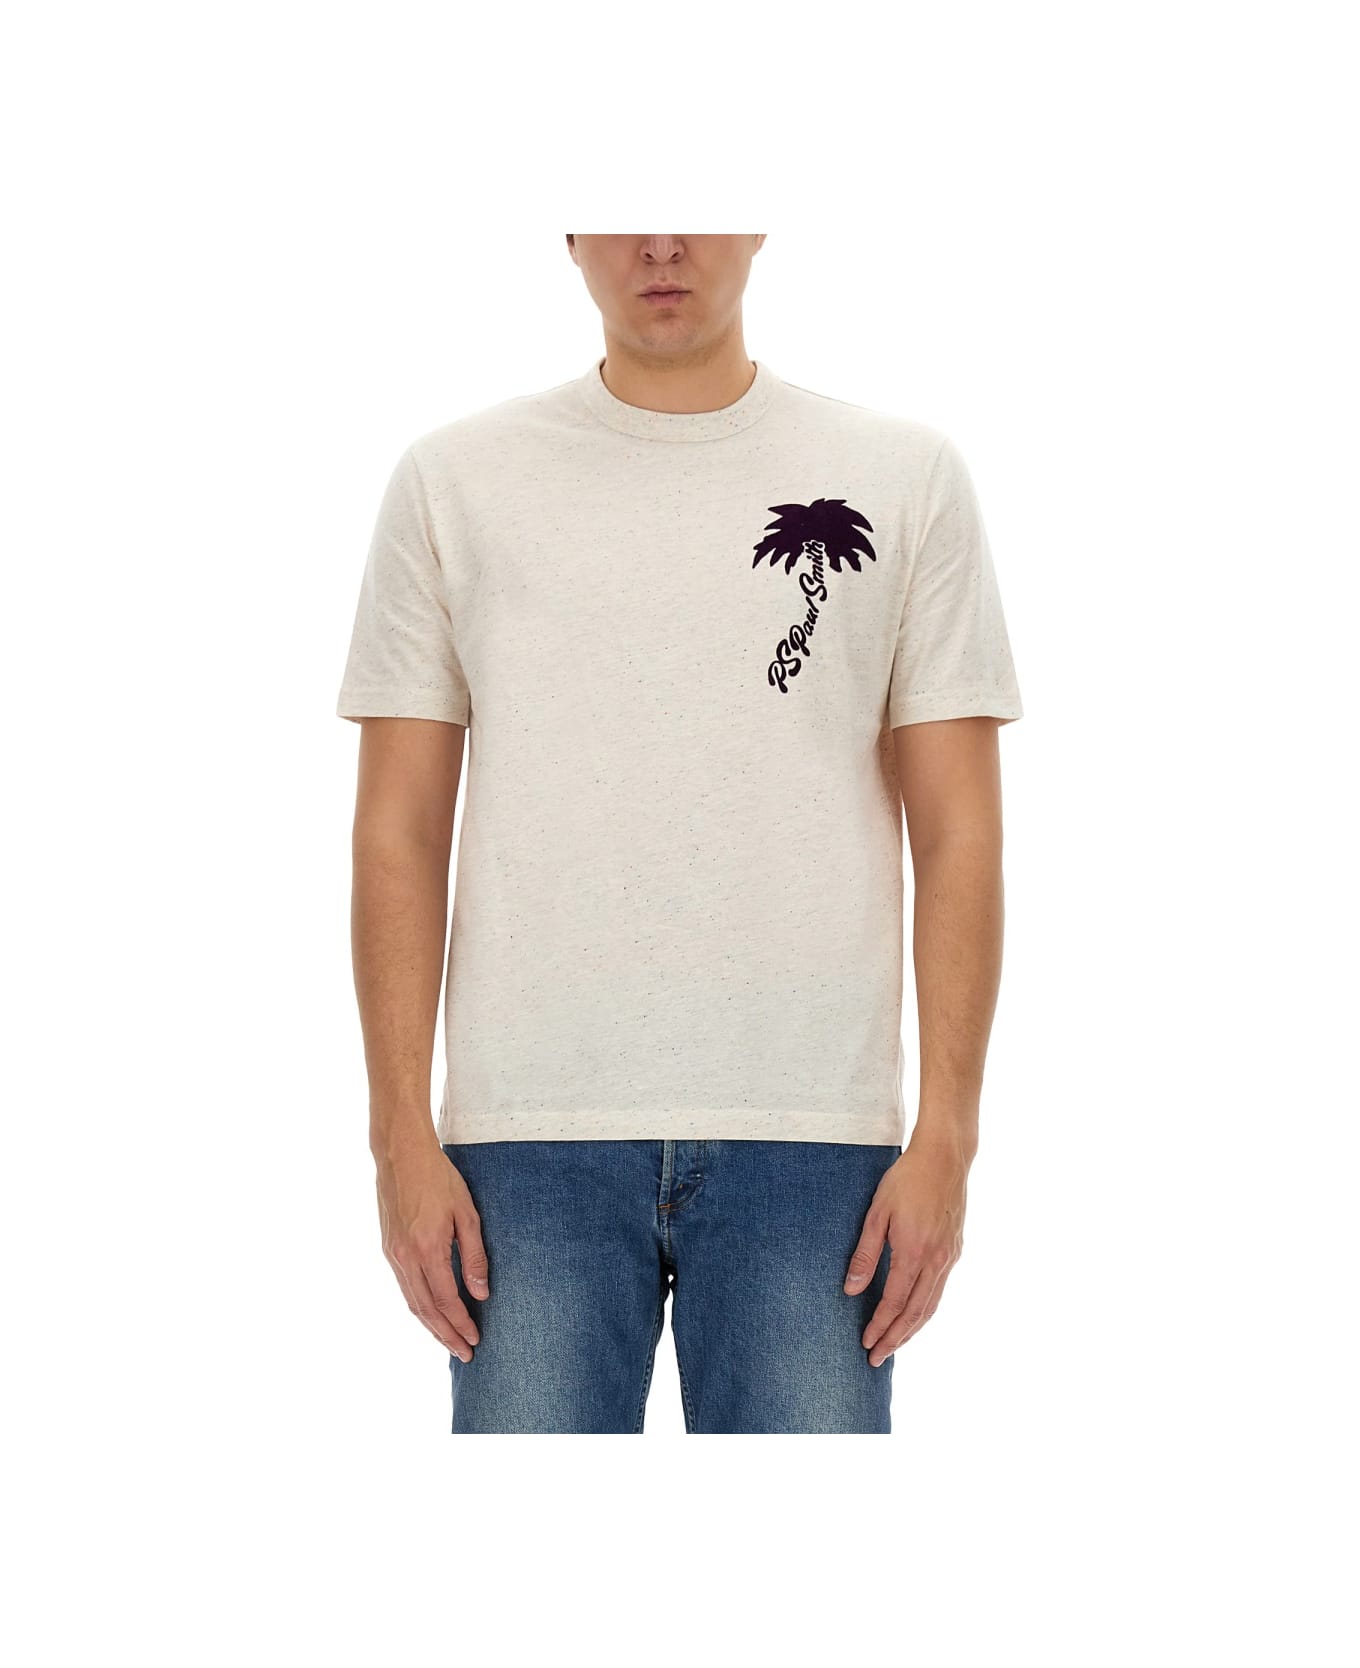 PS by Paul Smith T-shirt With Logo - WHITE シャツ